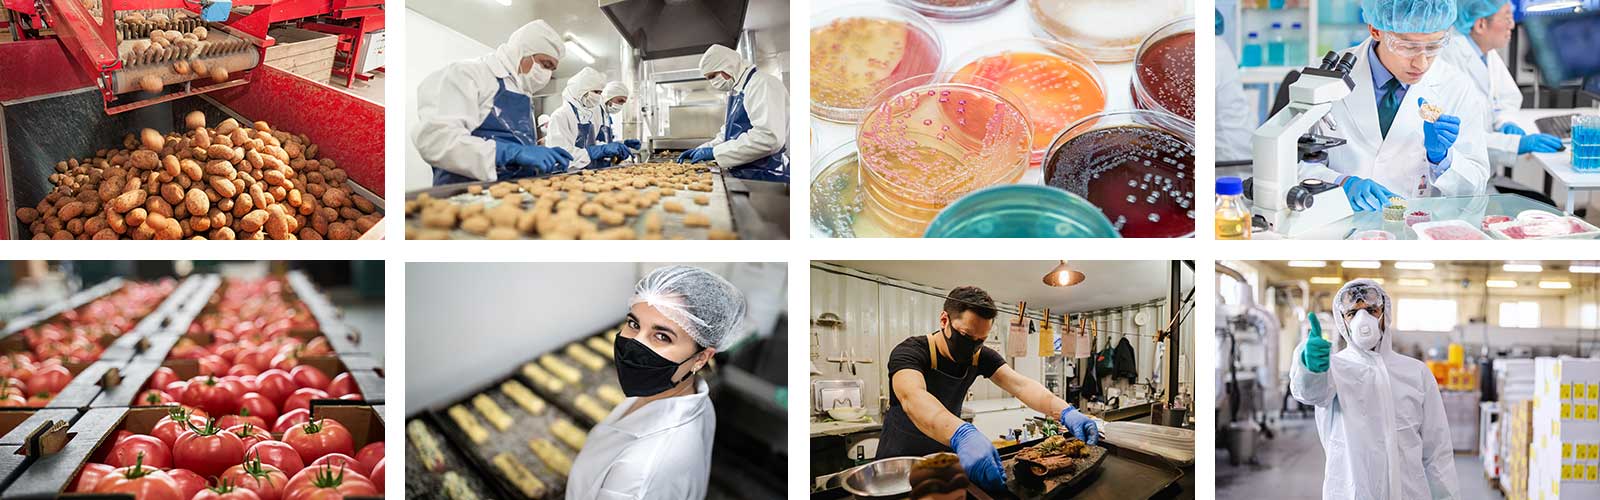 A selection of images of depicting food processing and food safety